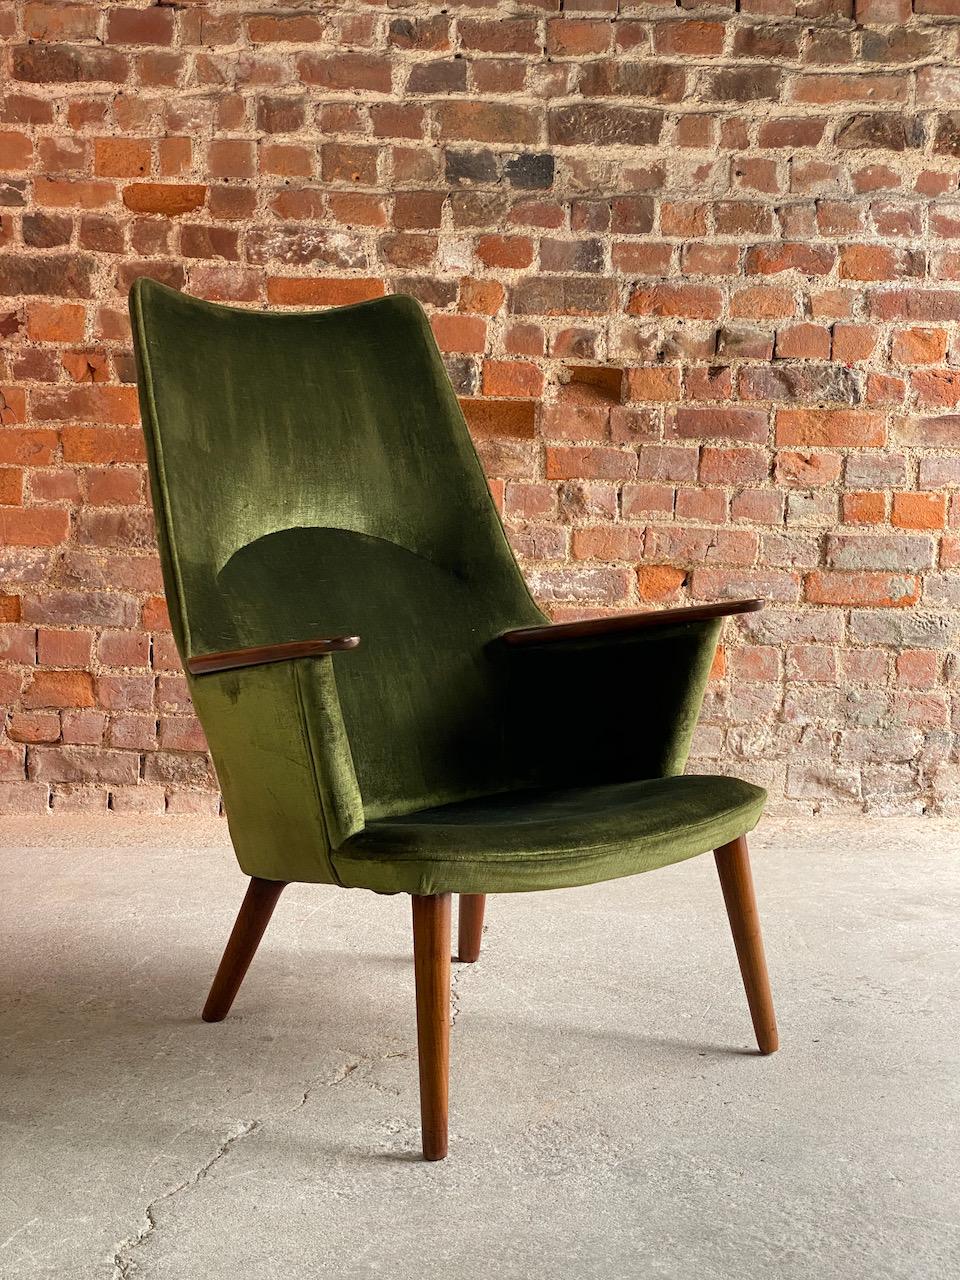 Hans Wegner Model AP27 lounge chair by AP Stolen Denmark 1955

Fabulous untouched mid century Danish Hans J. Wegner Model AP27 Lounge chair by AP Stolen Denmark Circa 1955, upholstered in its original deep forest green velvet upholstery with